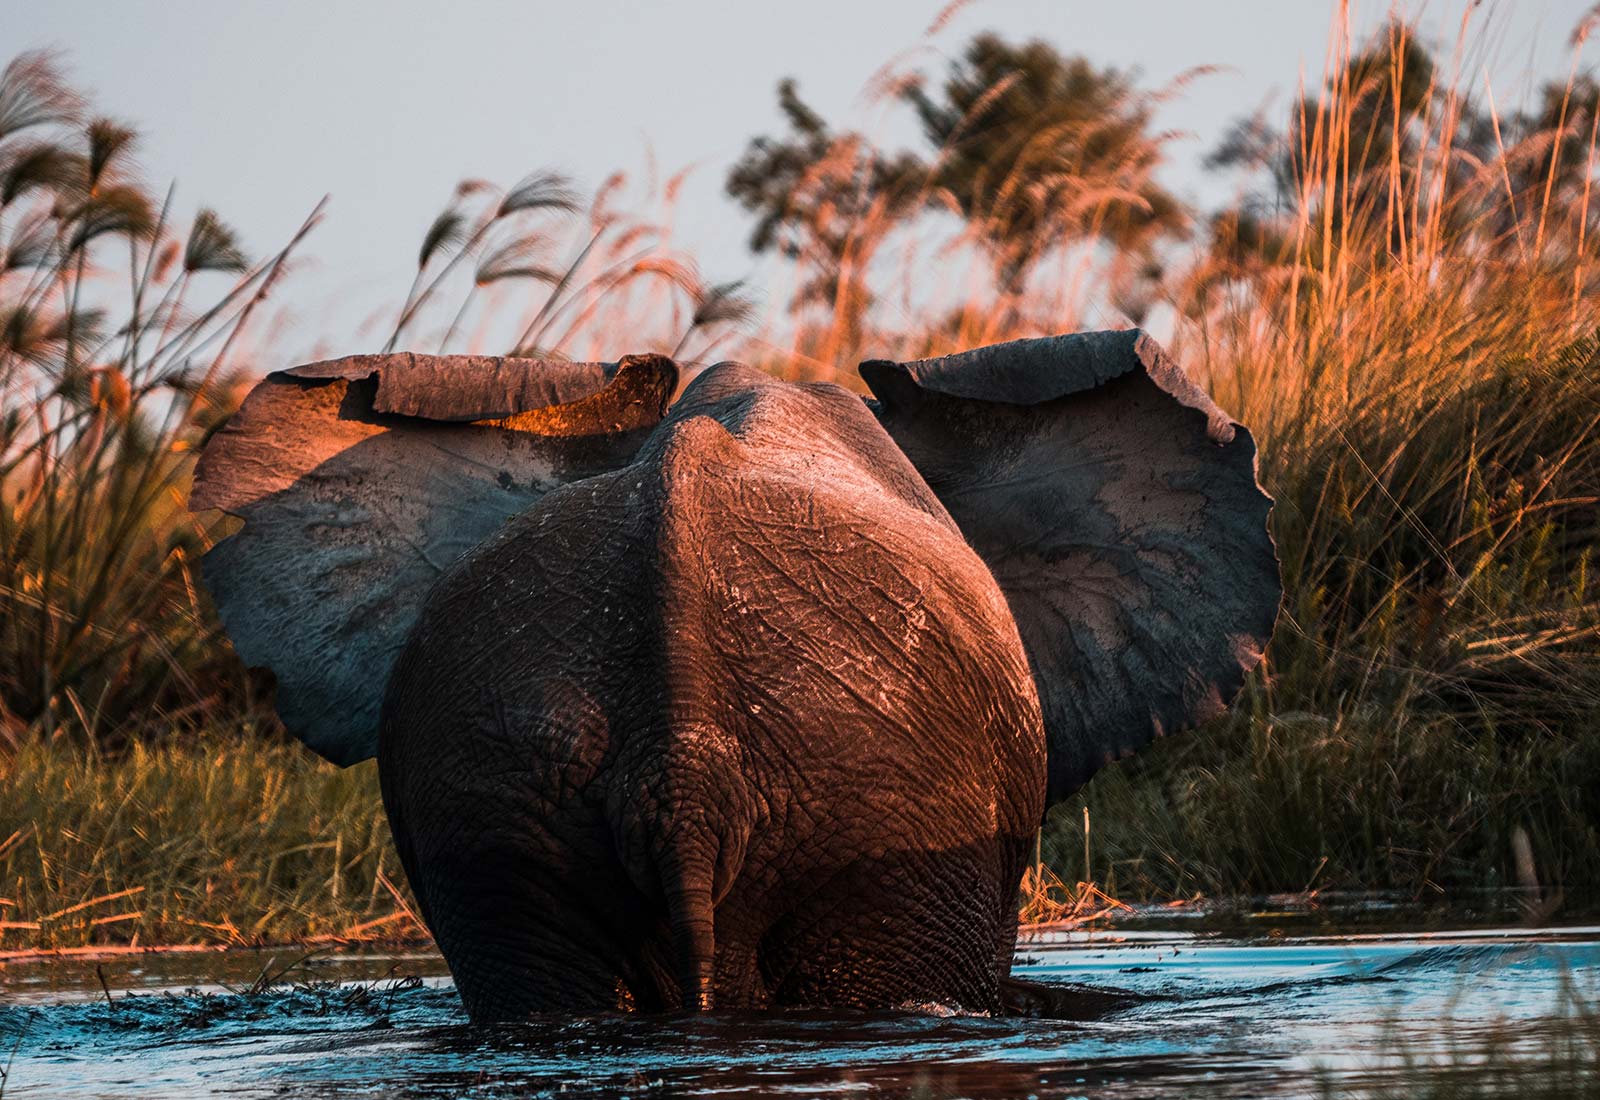 Elephant at Okavango Delta in Botswana, Africa. An owl and African sunsets